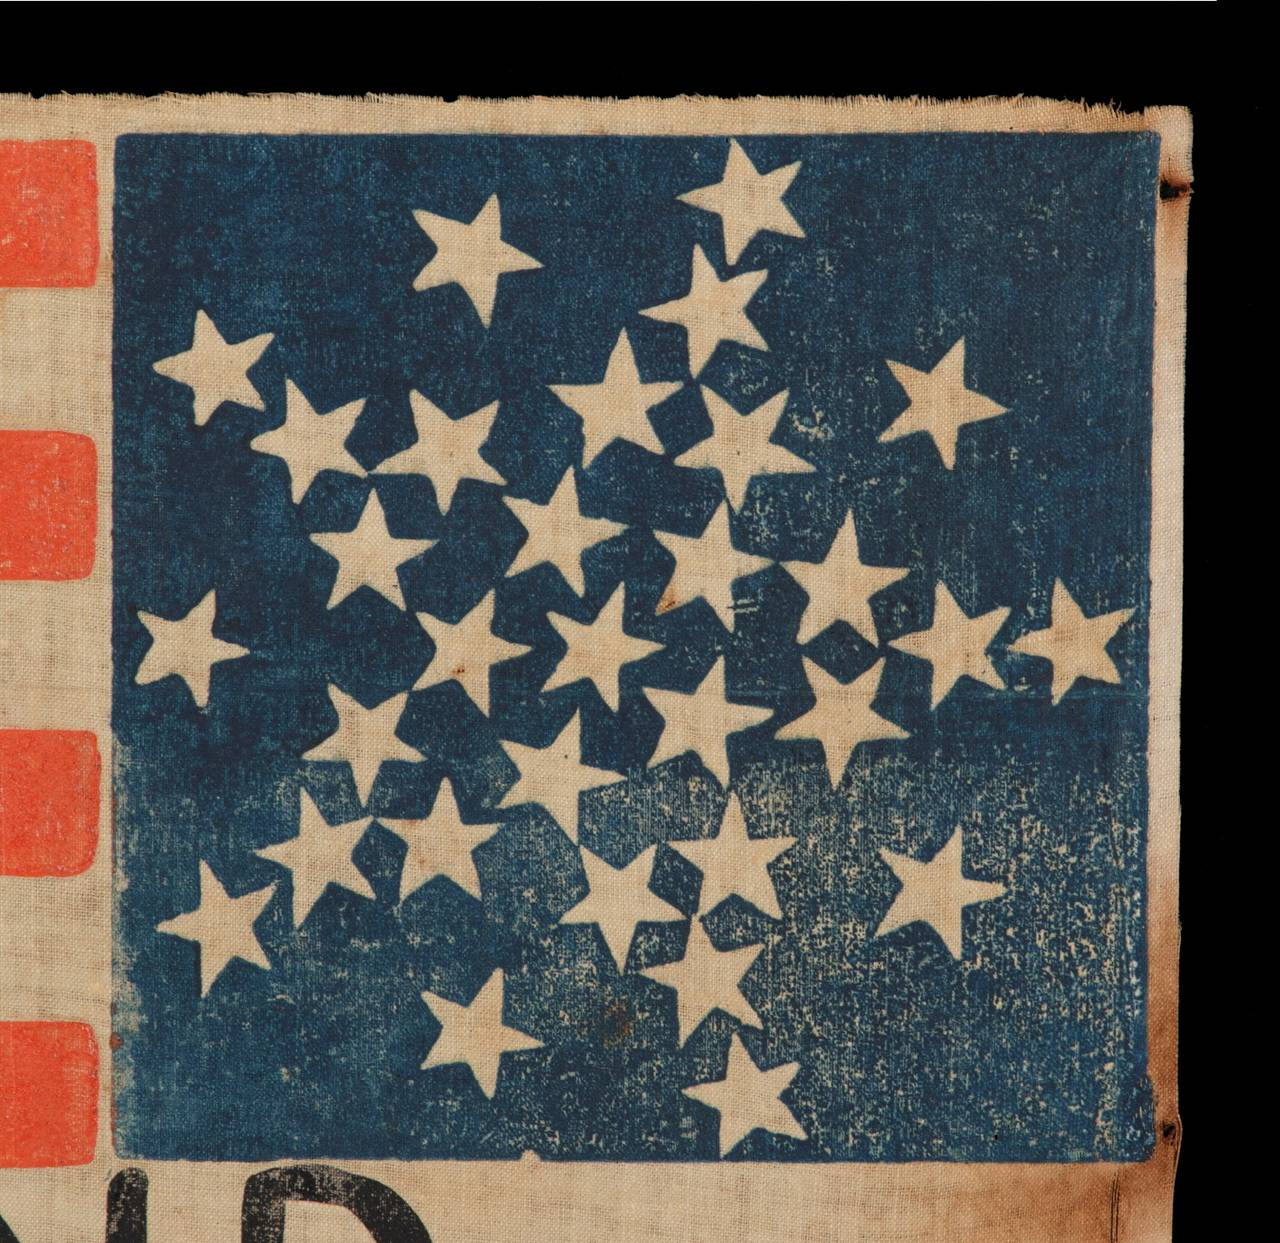 31 Star Flag Arranged in a Rare Variation of the 